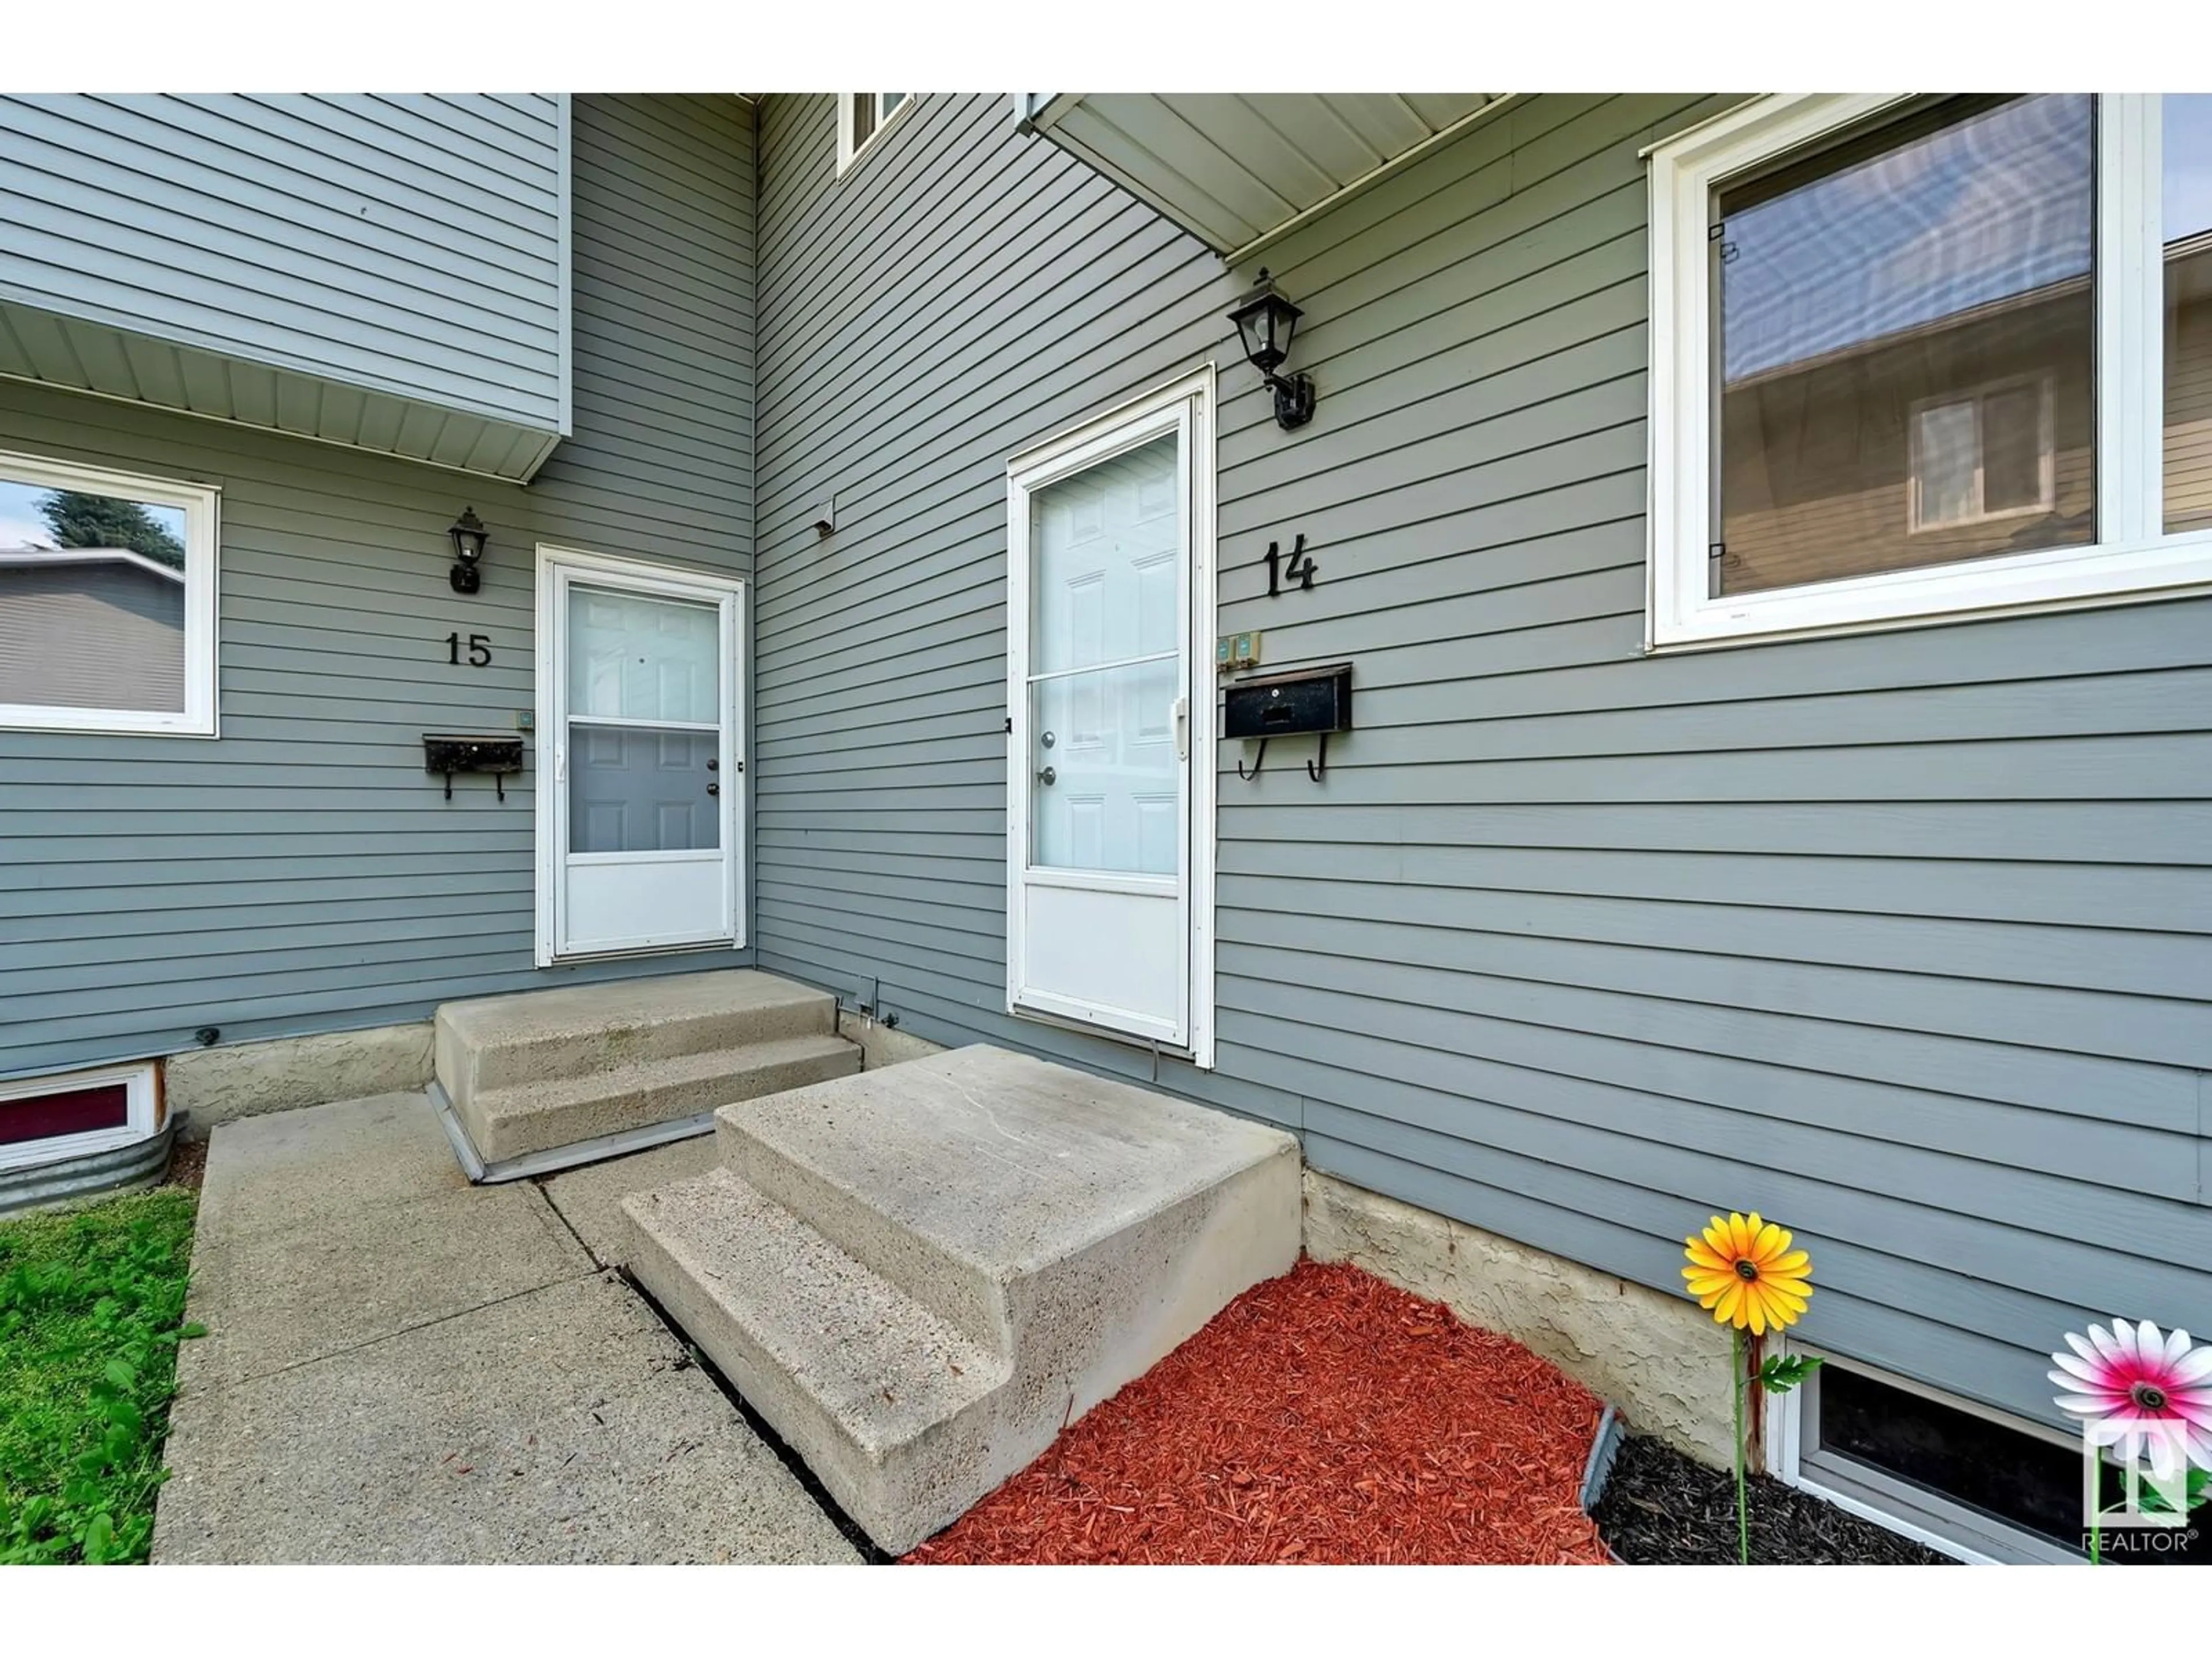 A pic from exterior of the house or condo for #14 1415 62 ST NW, Edmonton Alberta T6L4K1